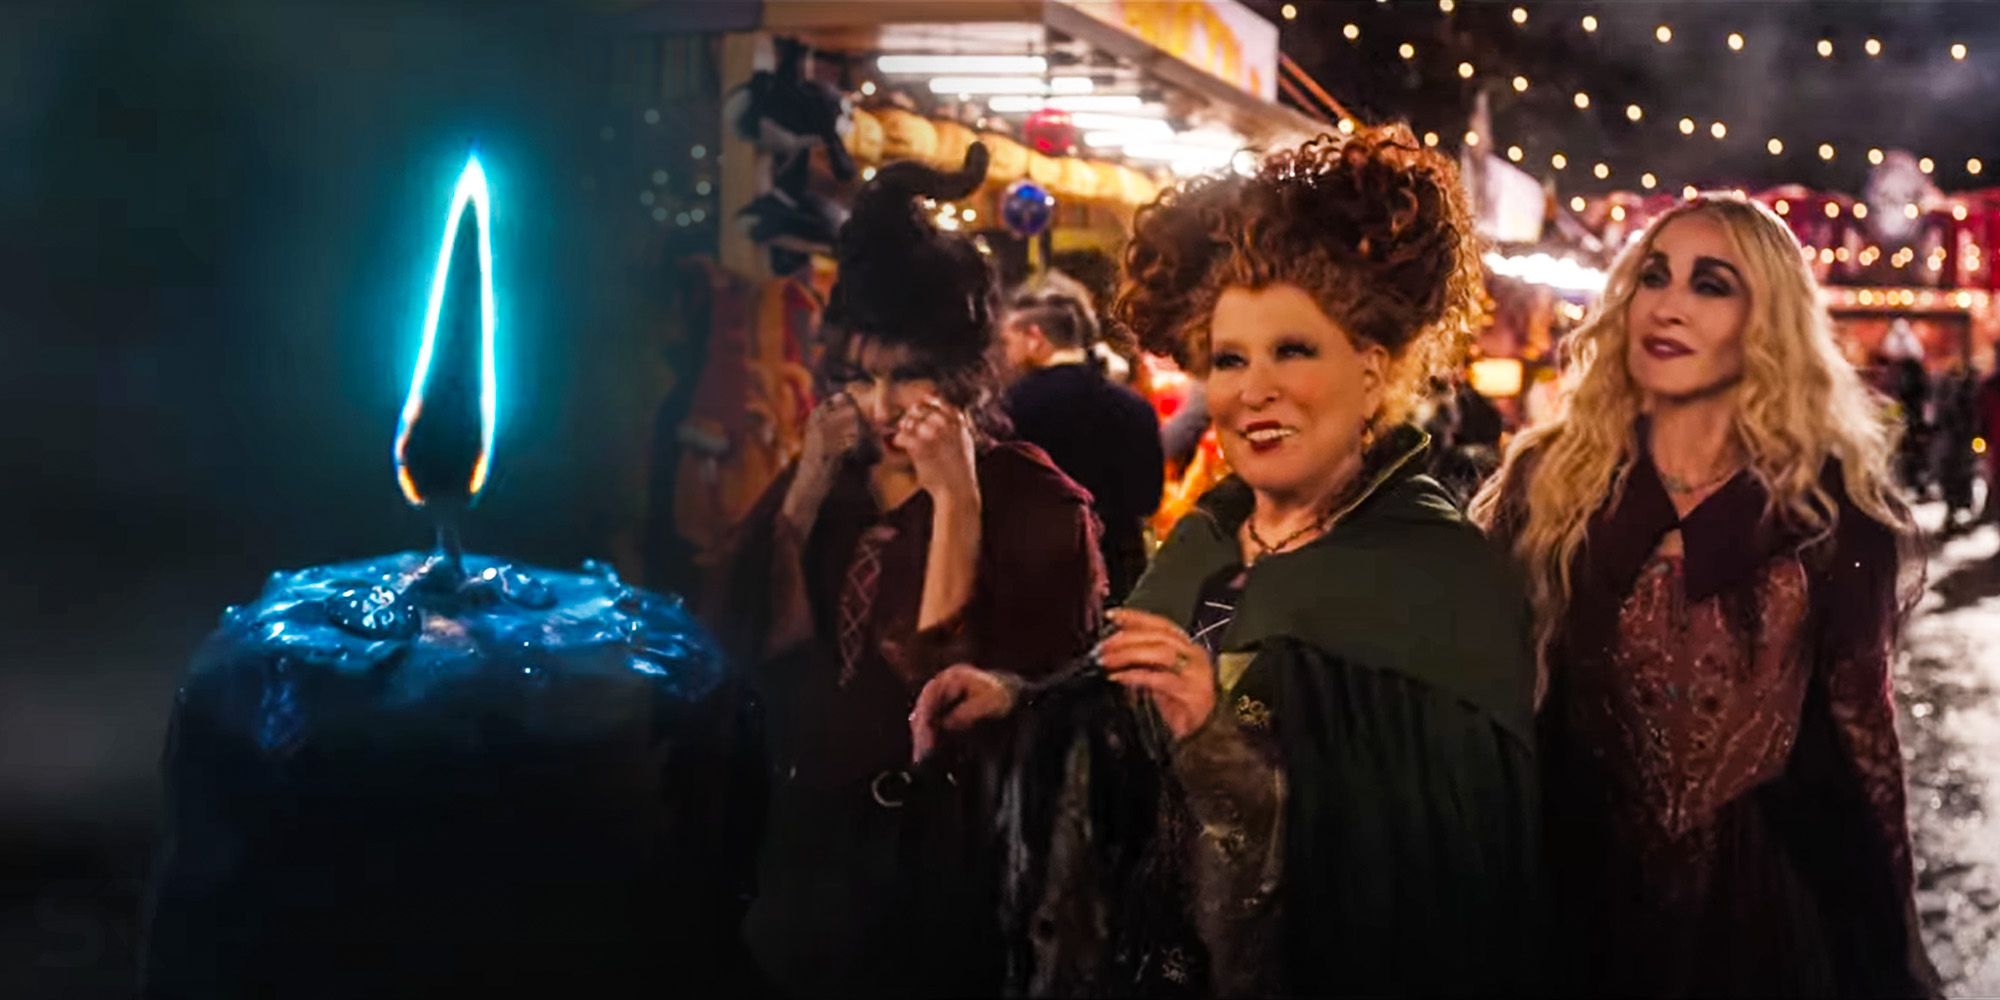 Hocus pocus 2 Trailer Debunked A Worrying Sequel Theory